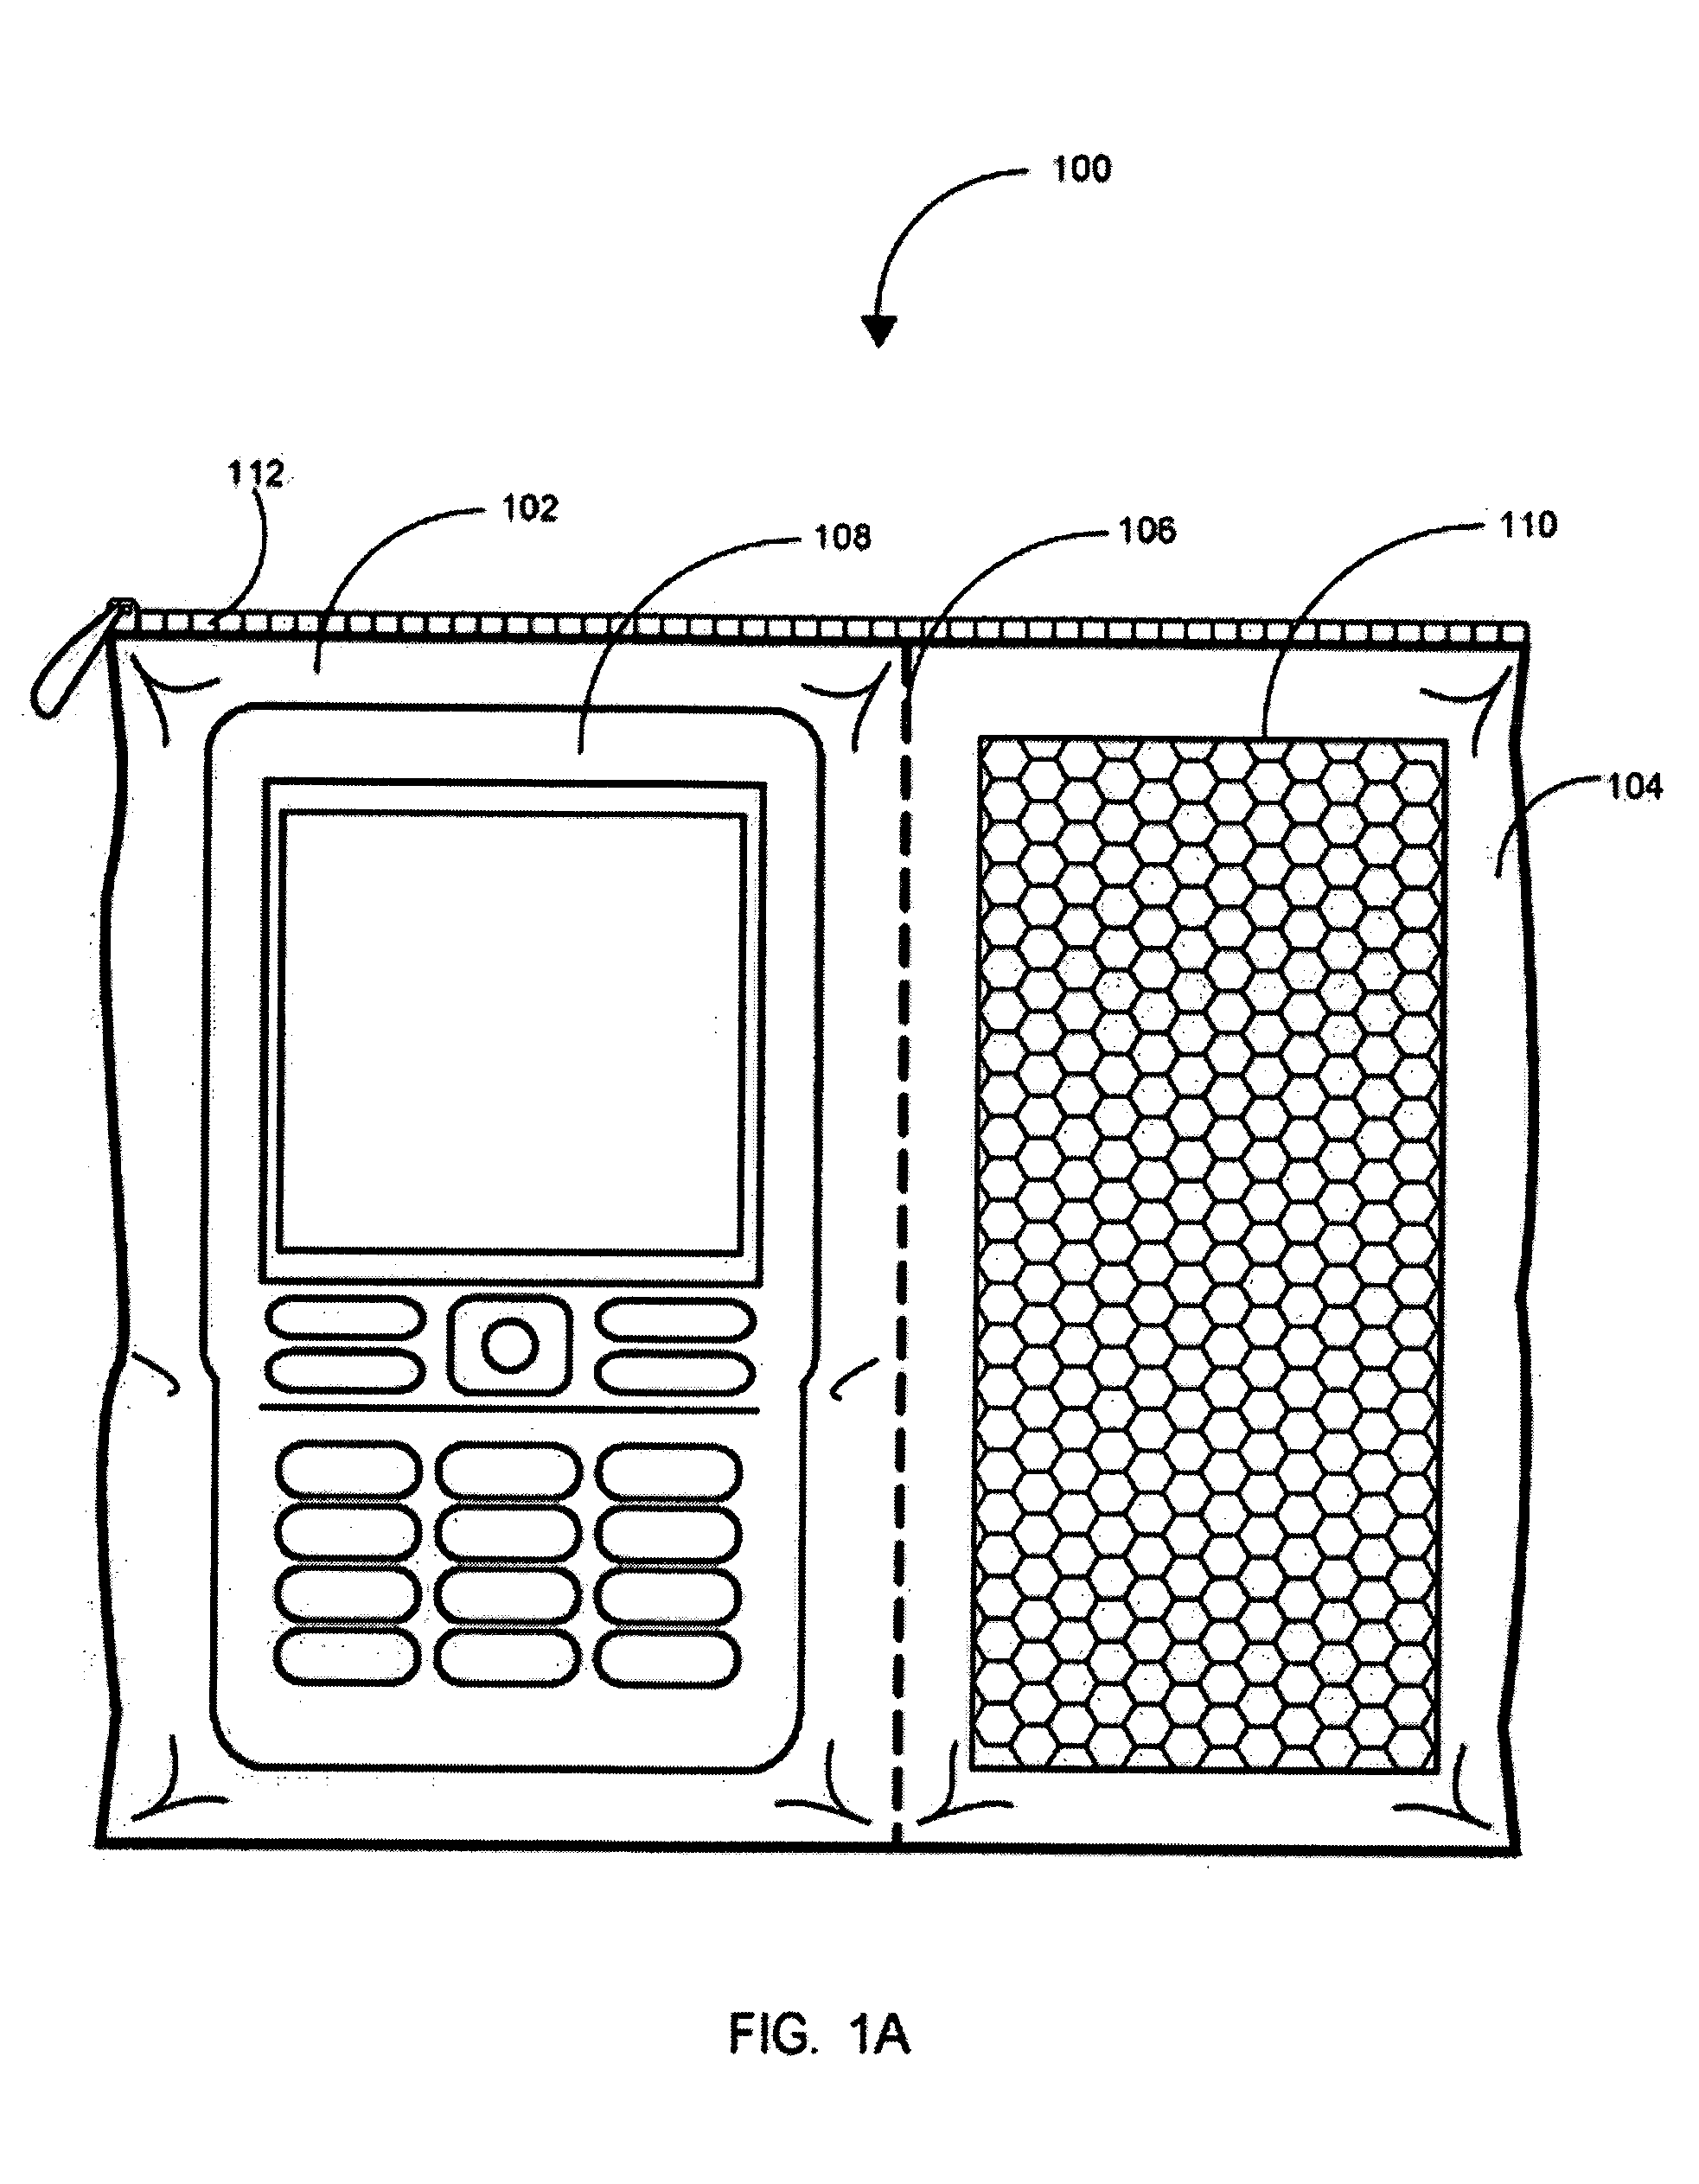 Apparatus and method for removing moisture from portable electronic devices